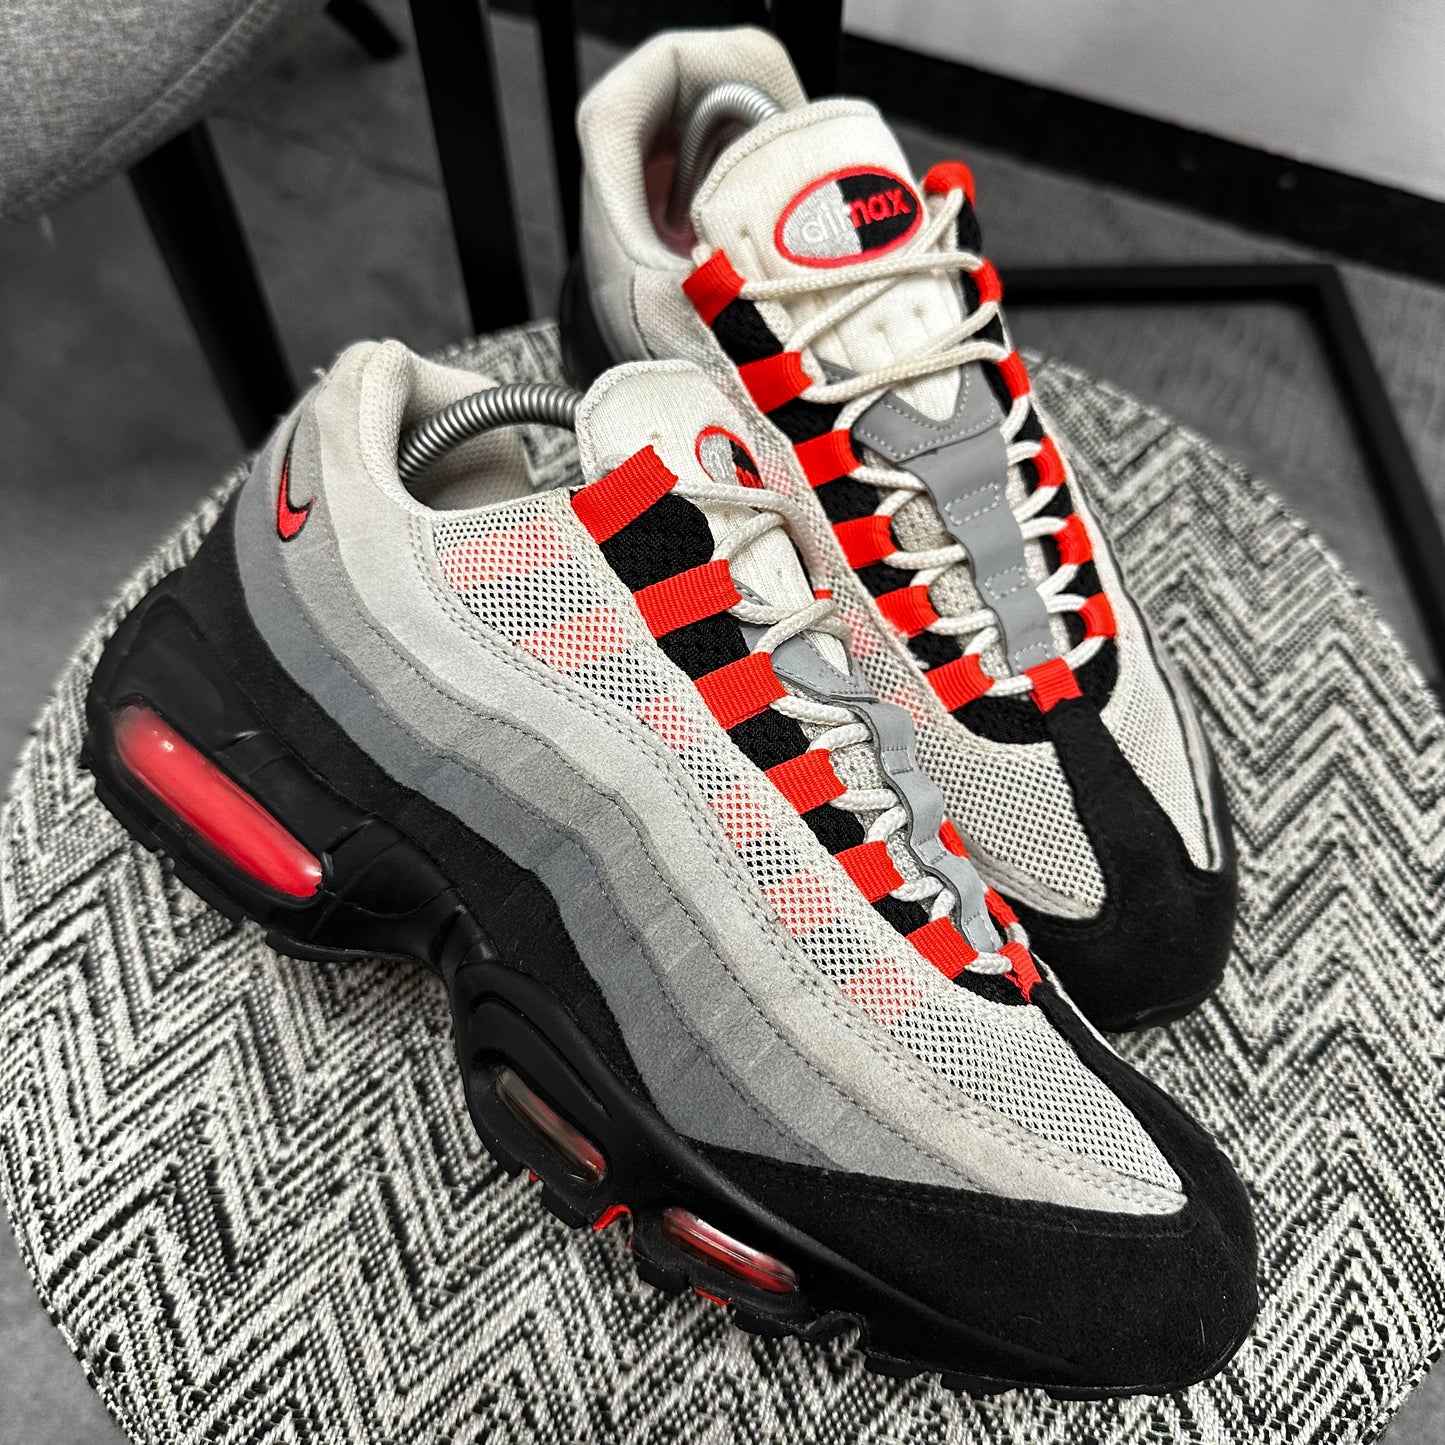 Used Air Max 95 Solar Red OG (2013)